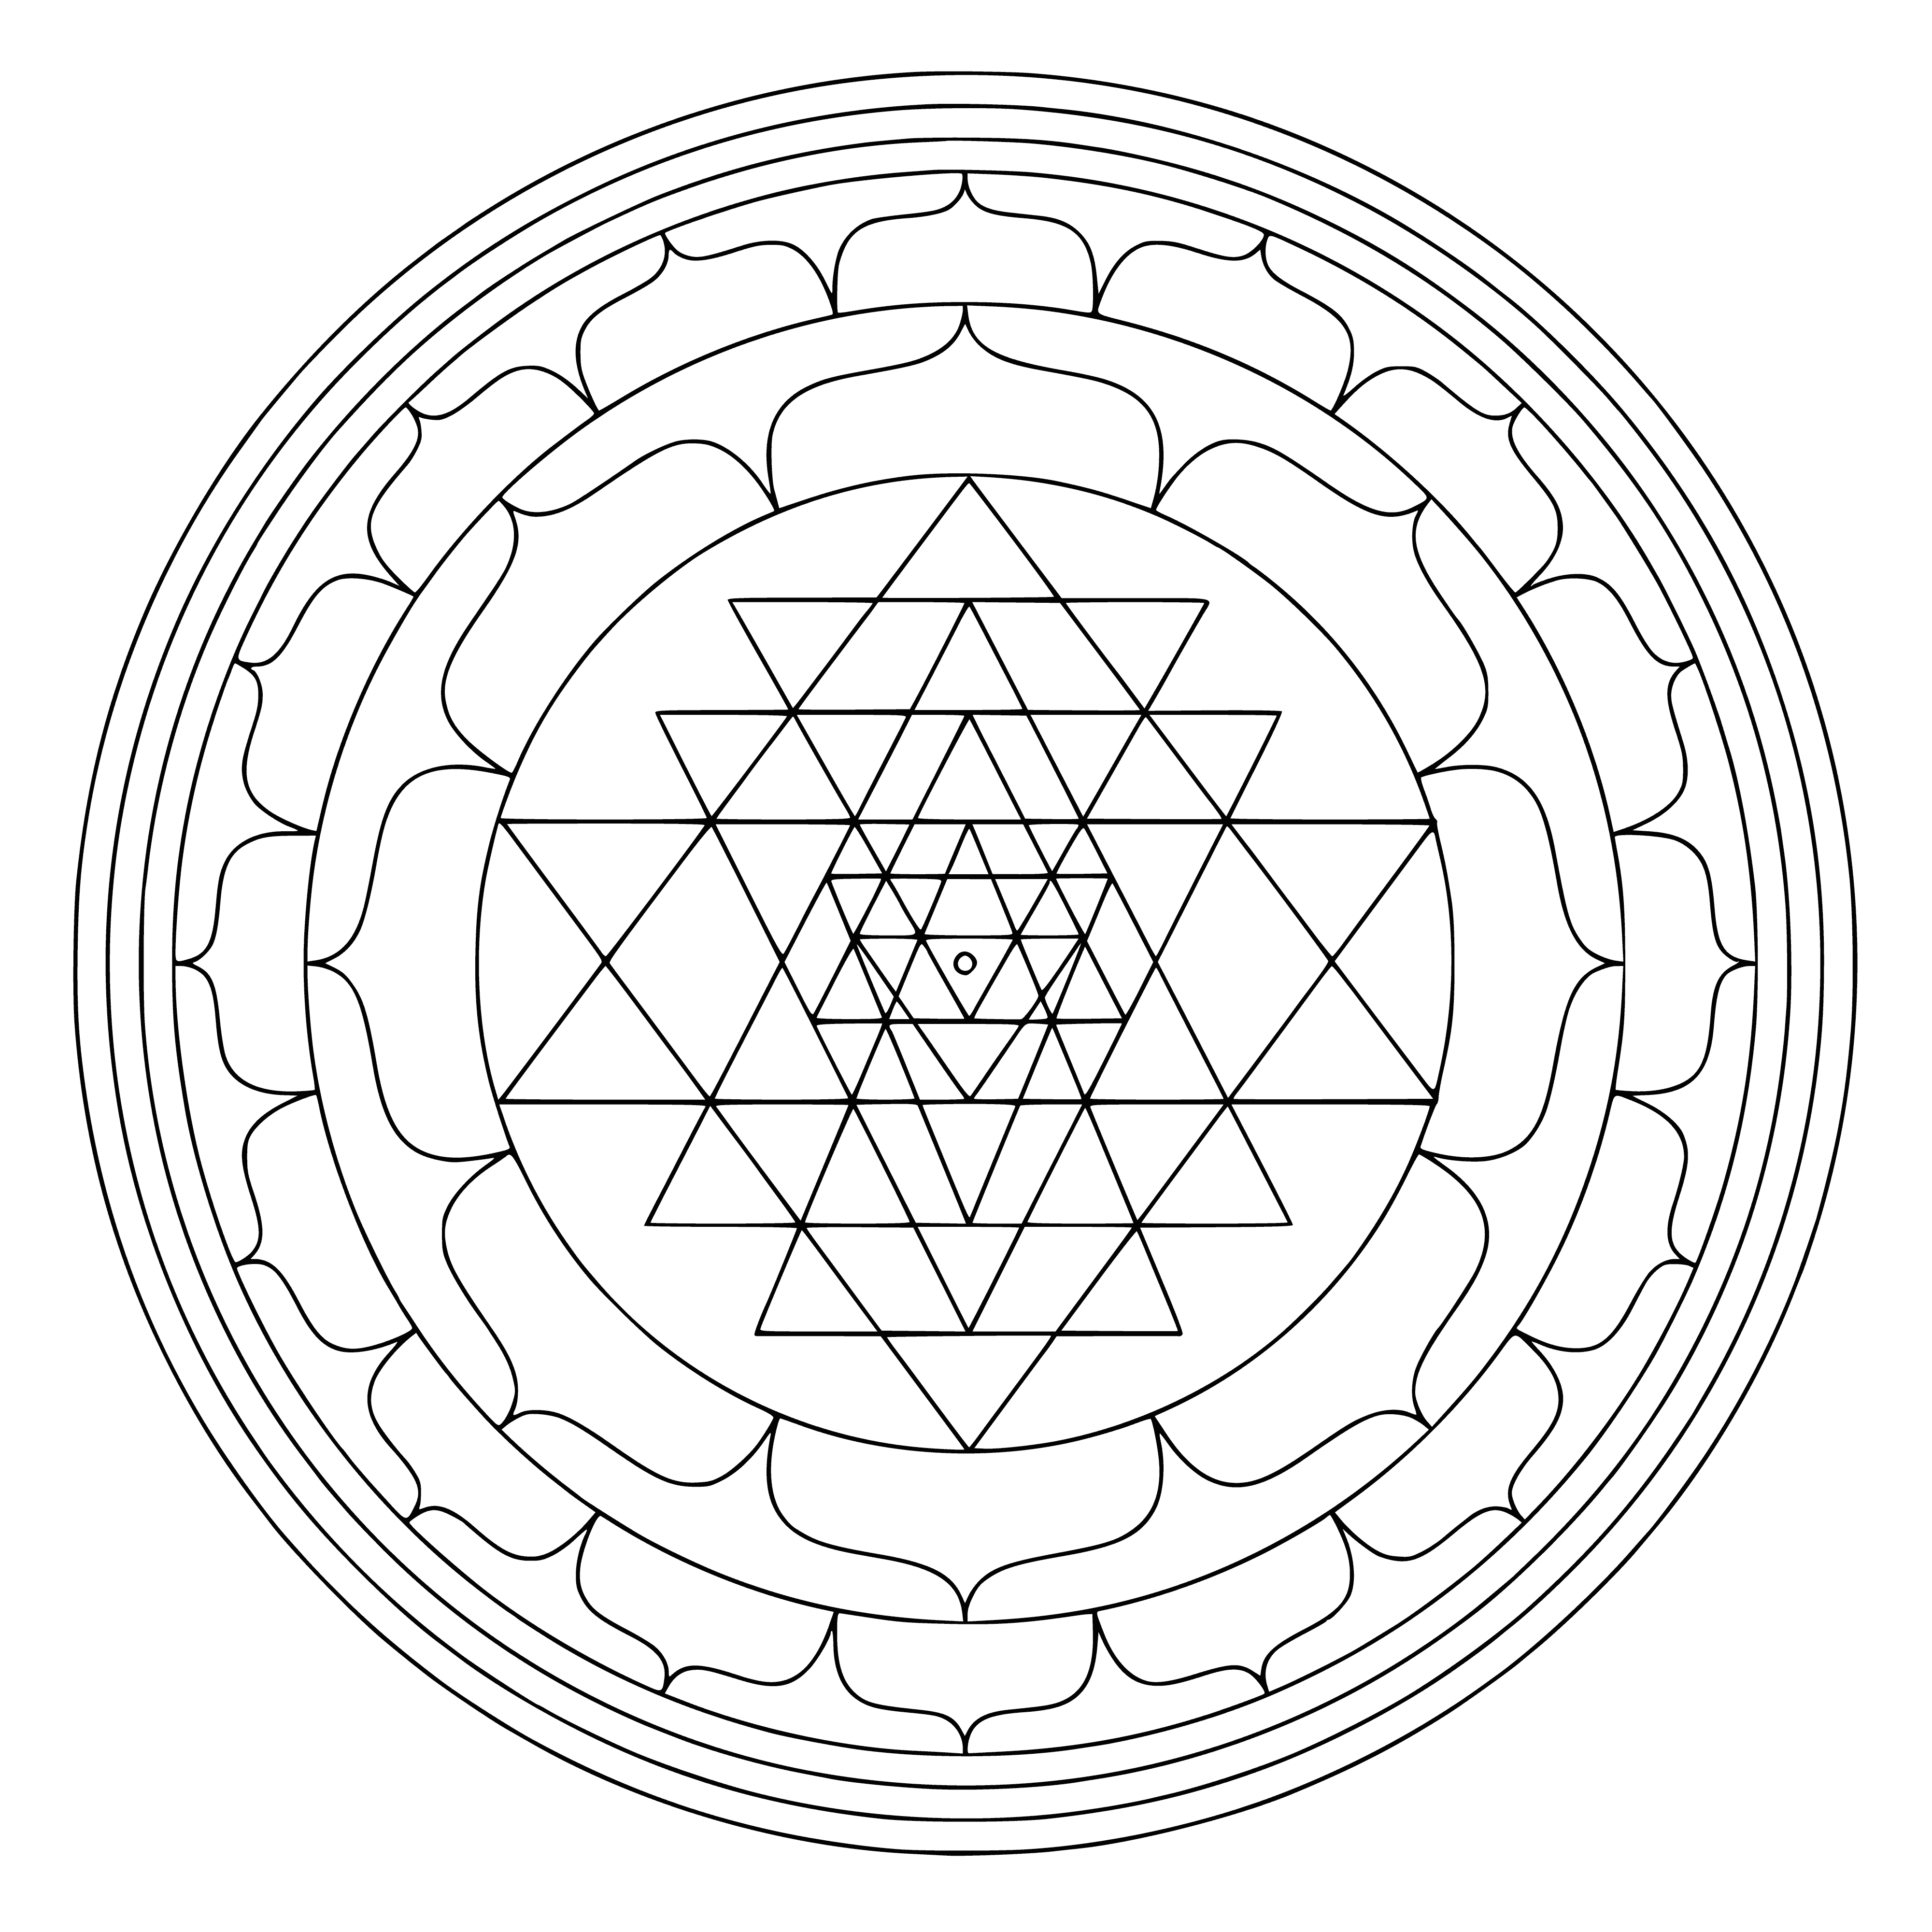 coloring page: A mandala of balance & harmony w/ a 4-petaled lotus in the center & 8 petals around it, surrounded by triangles pointing inward.